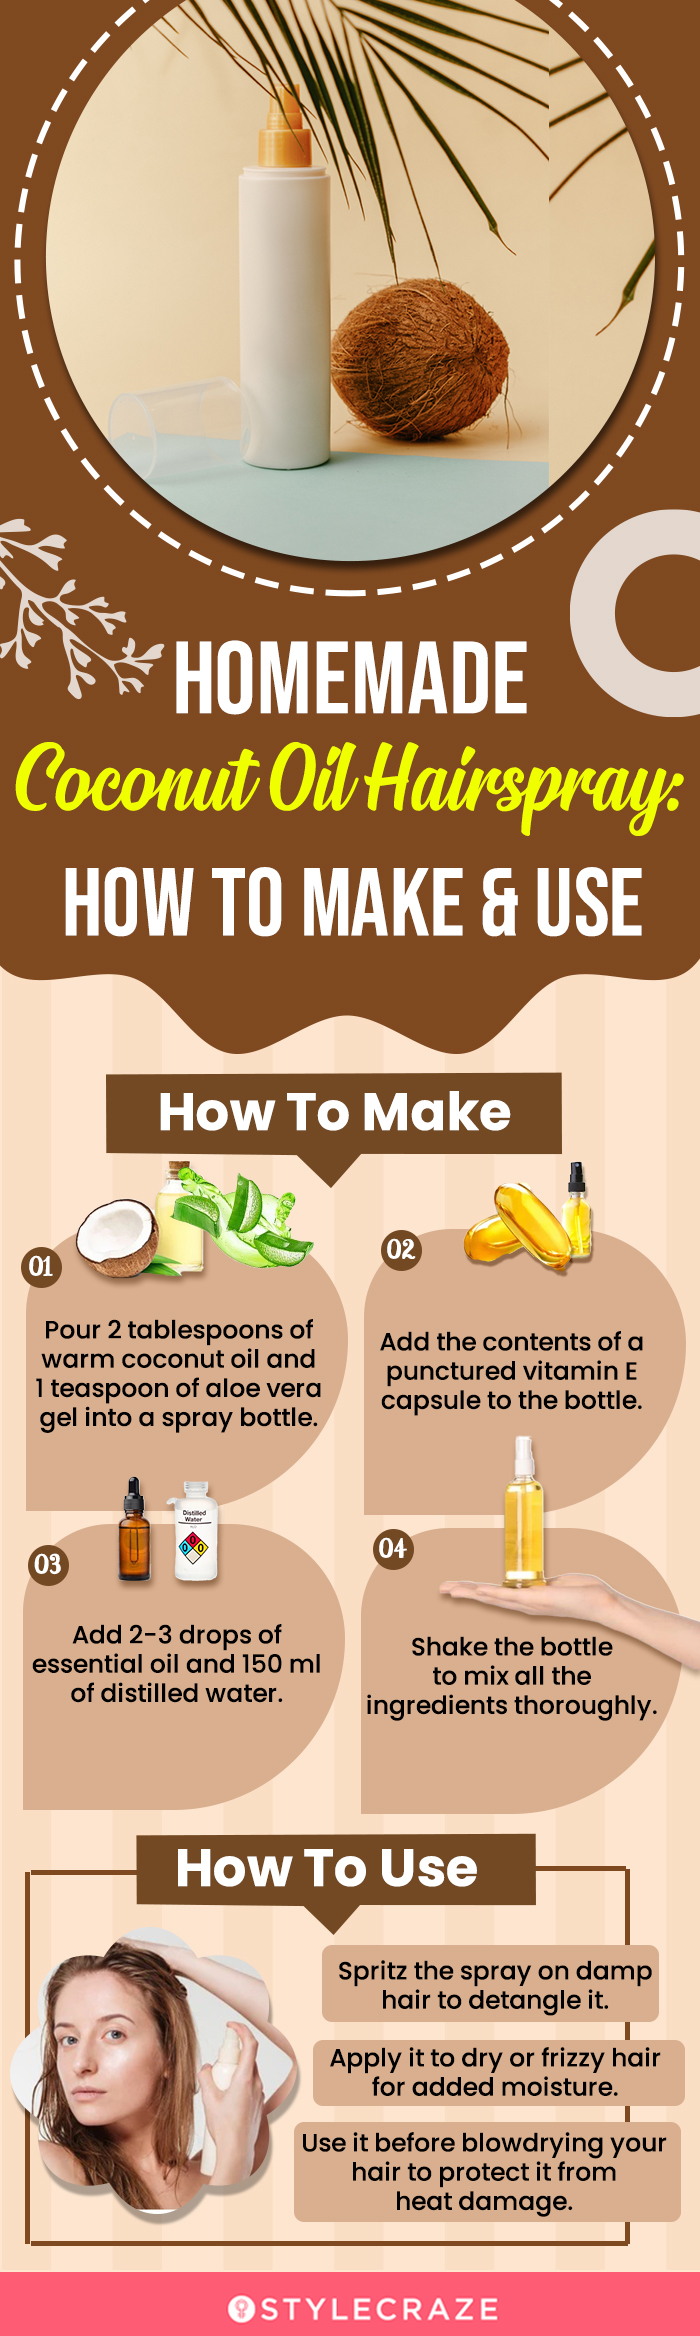 the complete guide to coconut oil hairspray (infographic)